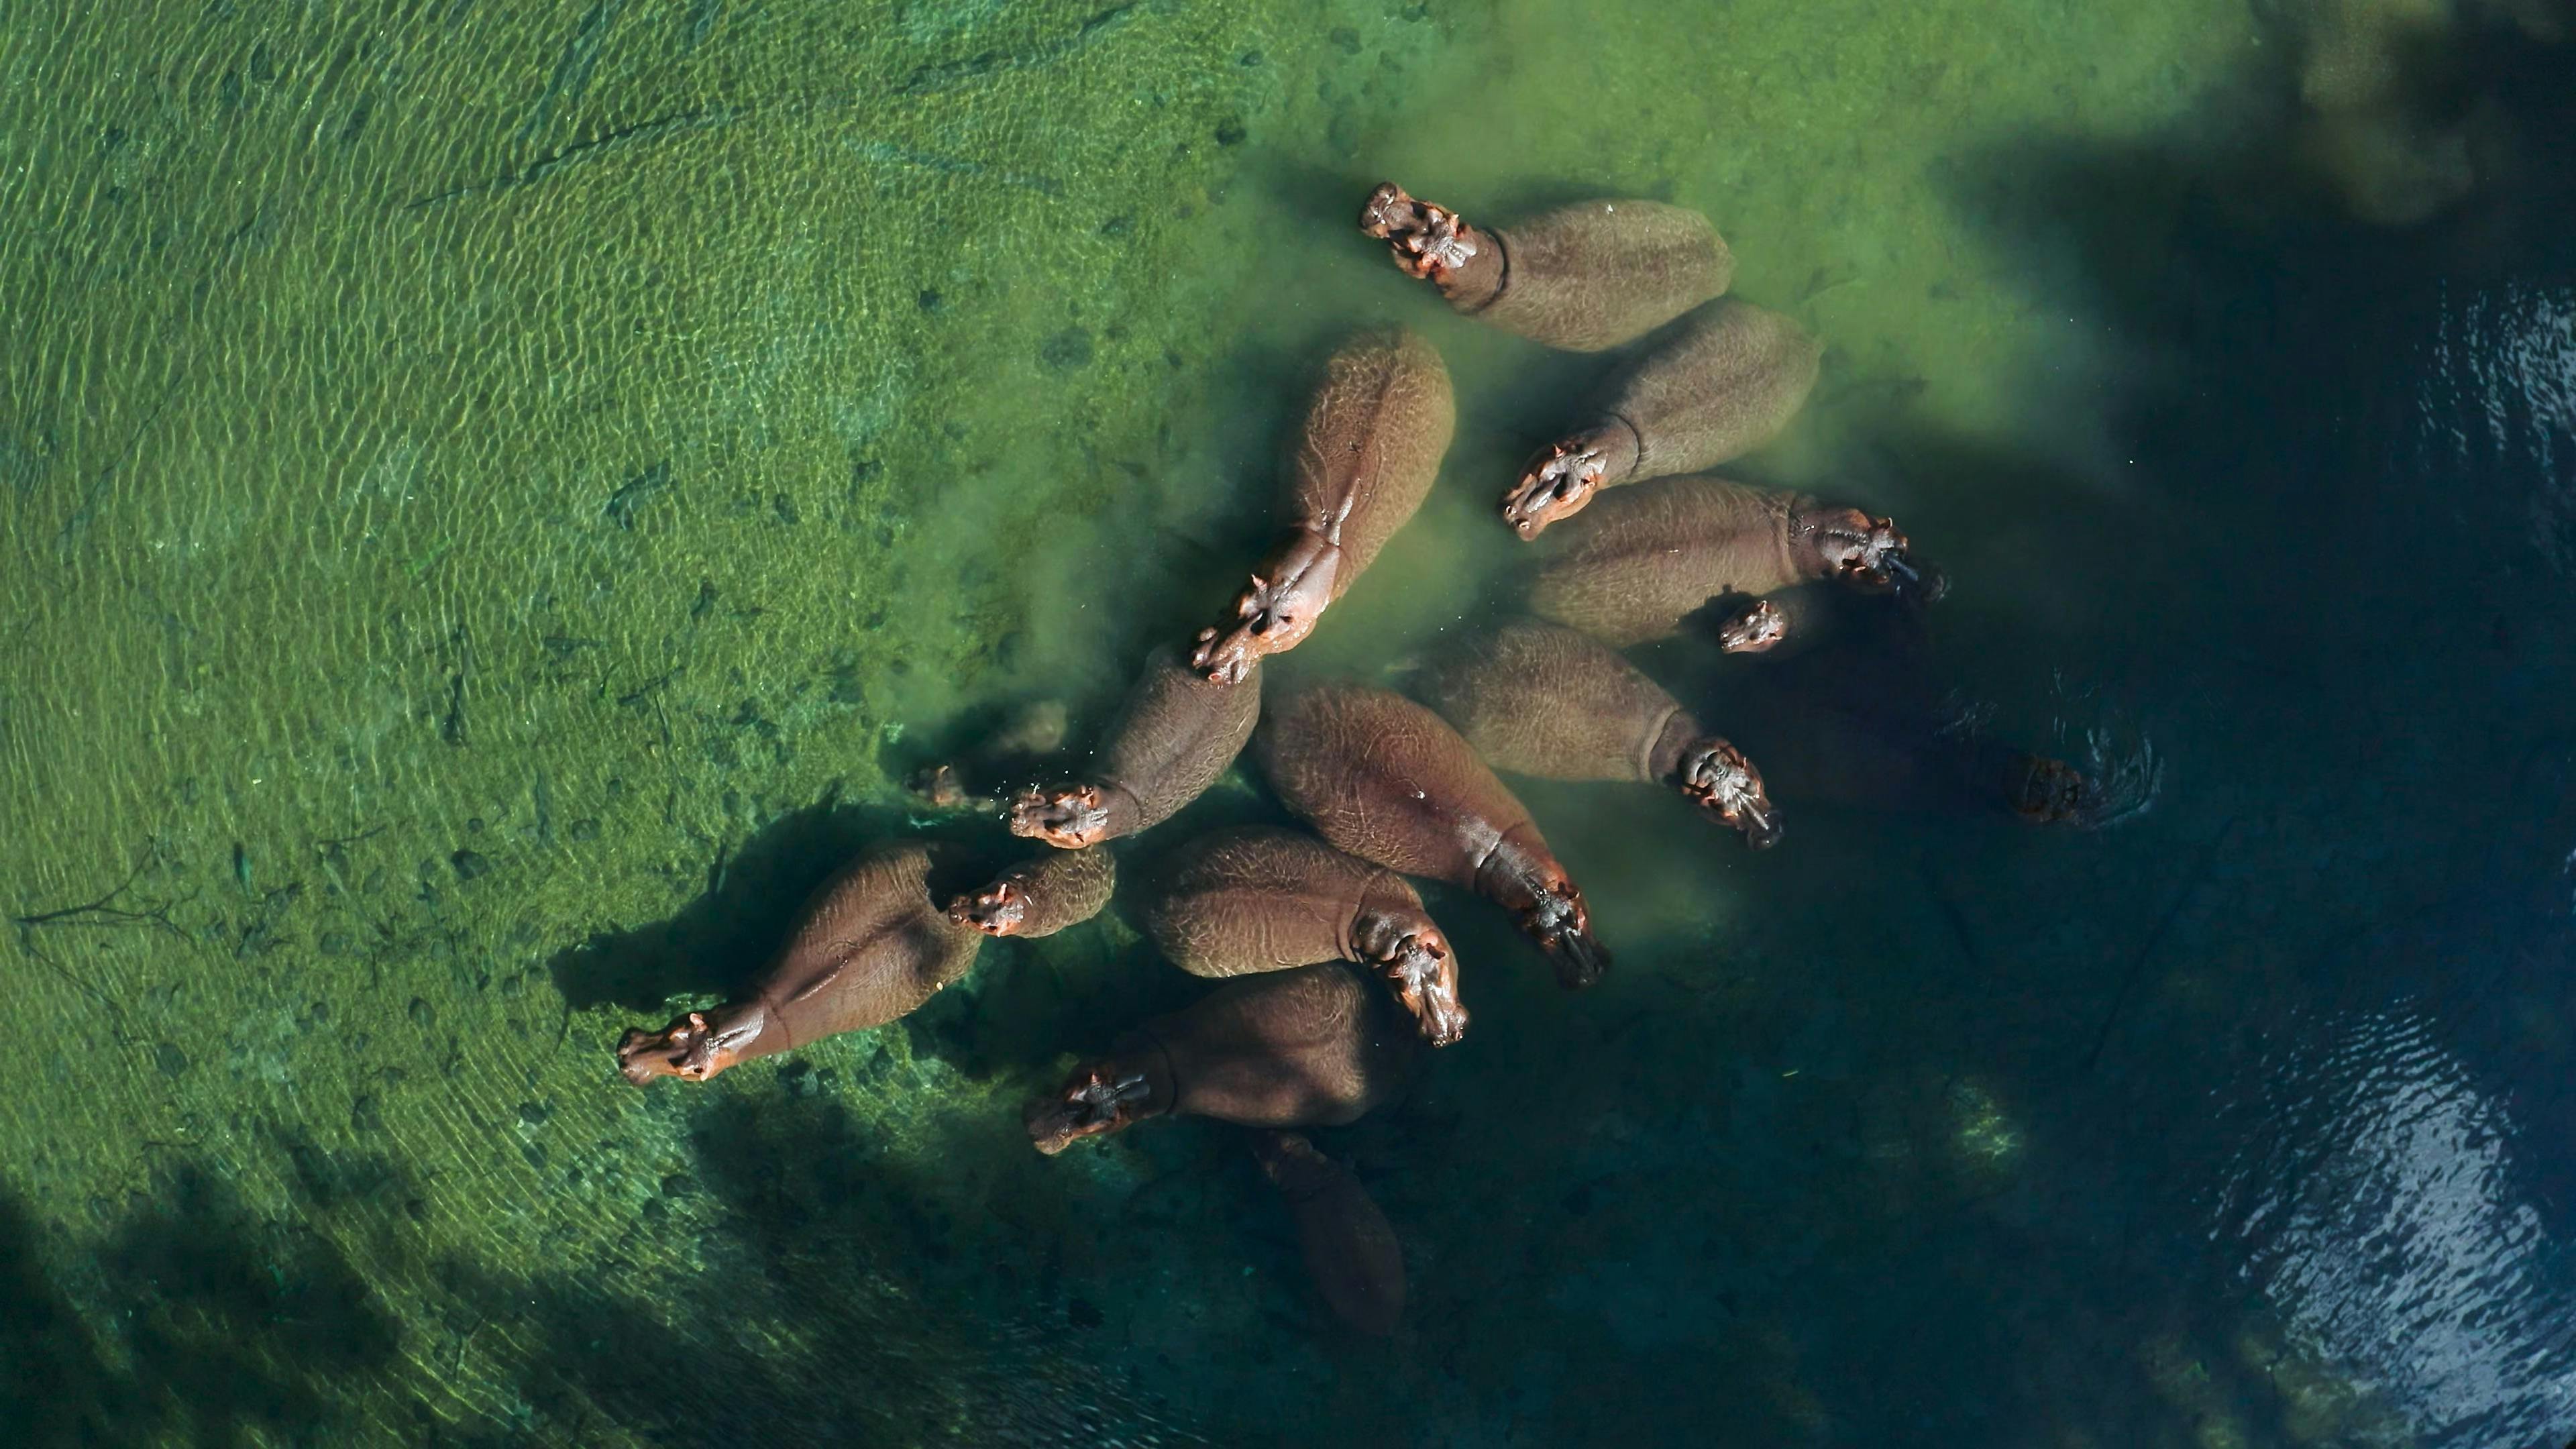 Some hippos float around a green pool of water.